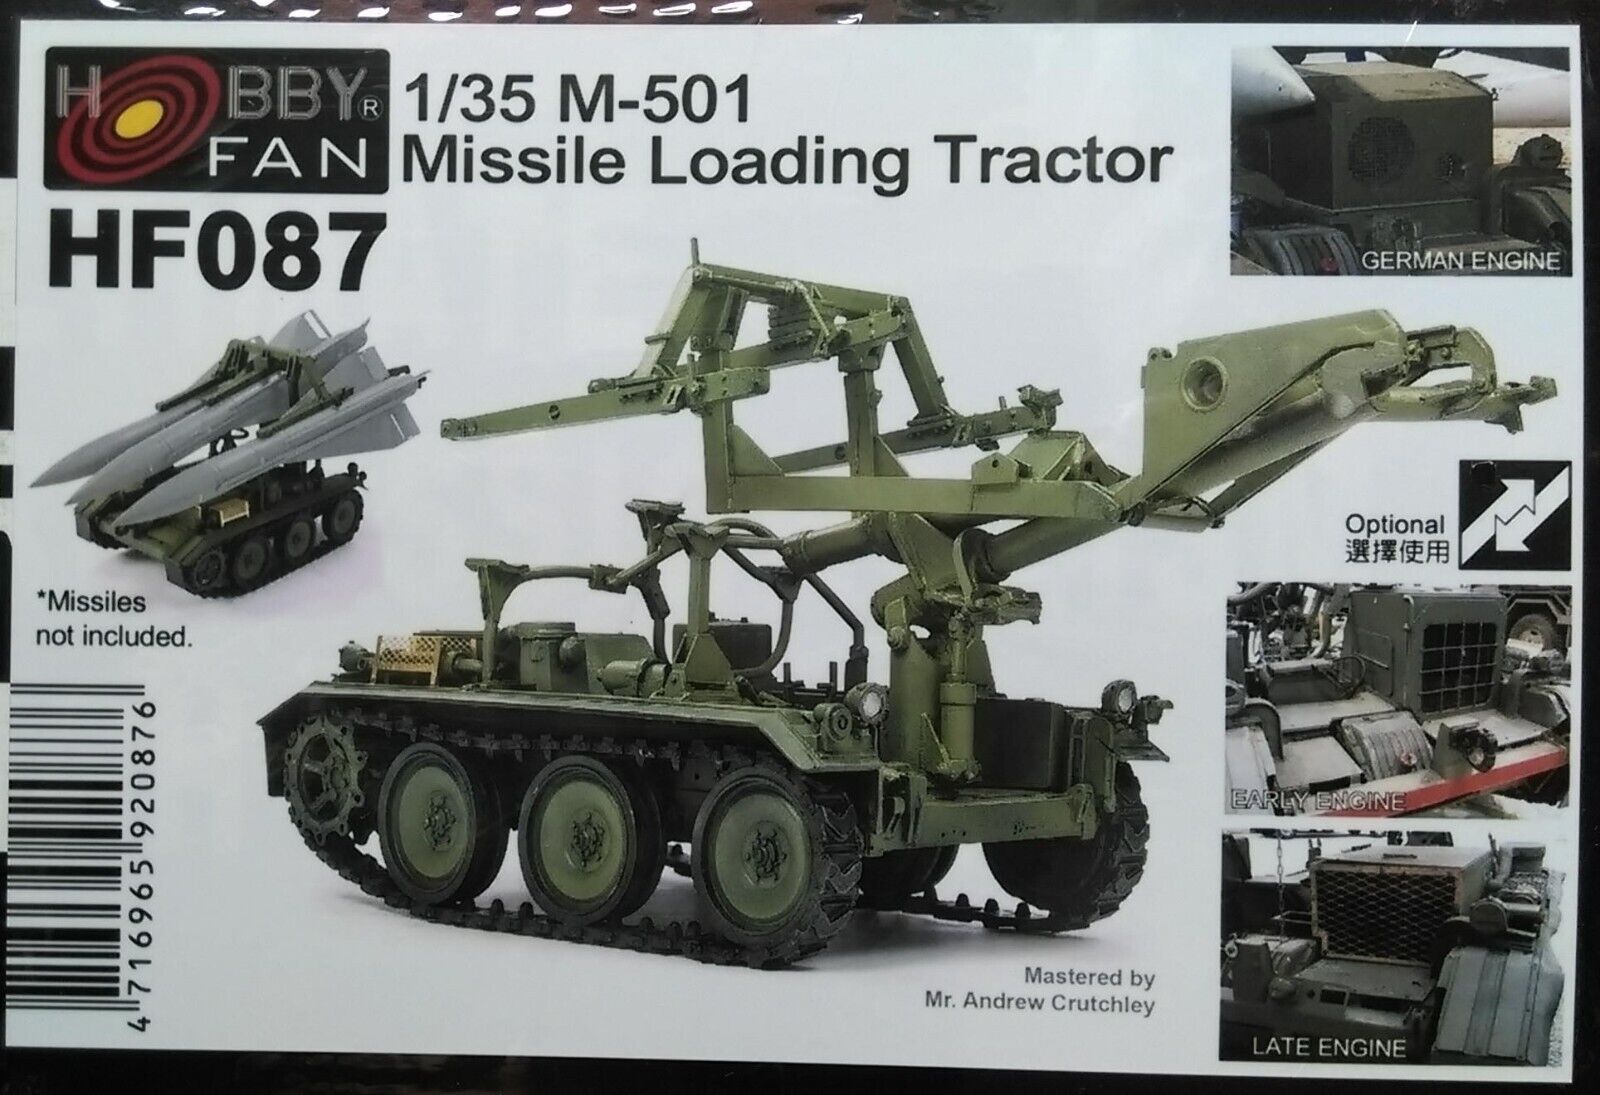 Hobby Fan 1/35 M-501 Missile loading tractor for MIM-23 HAWK Missile Resin  kit